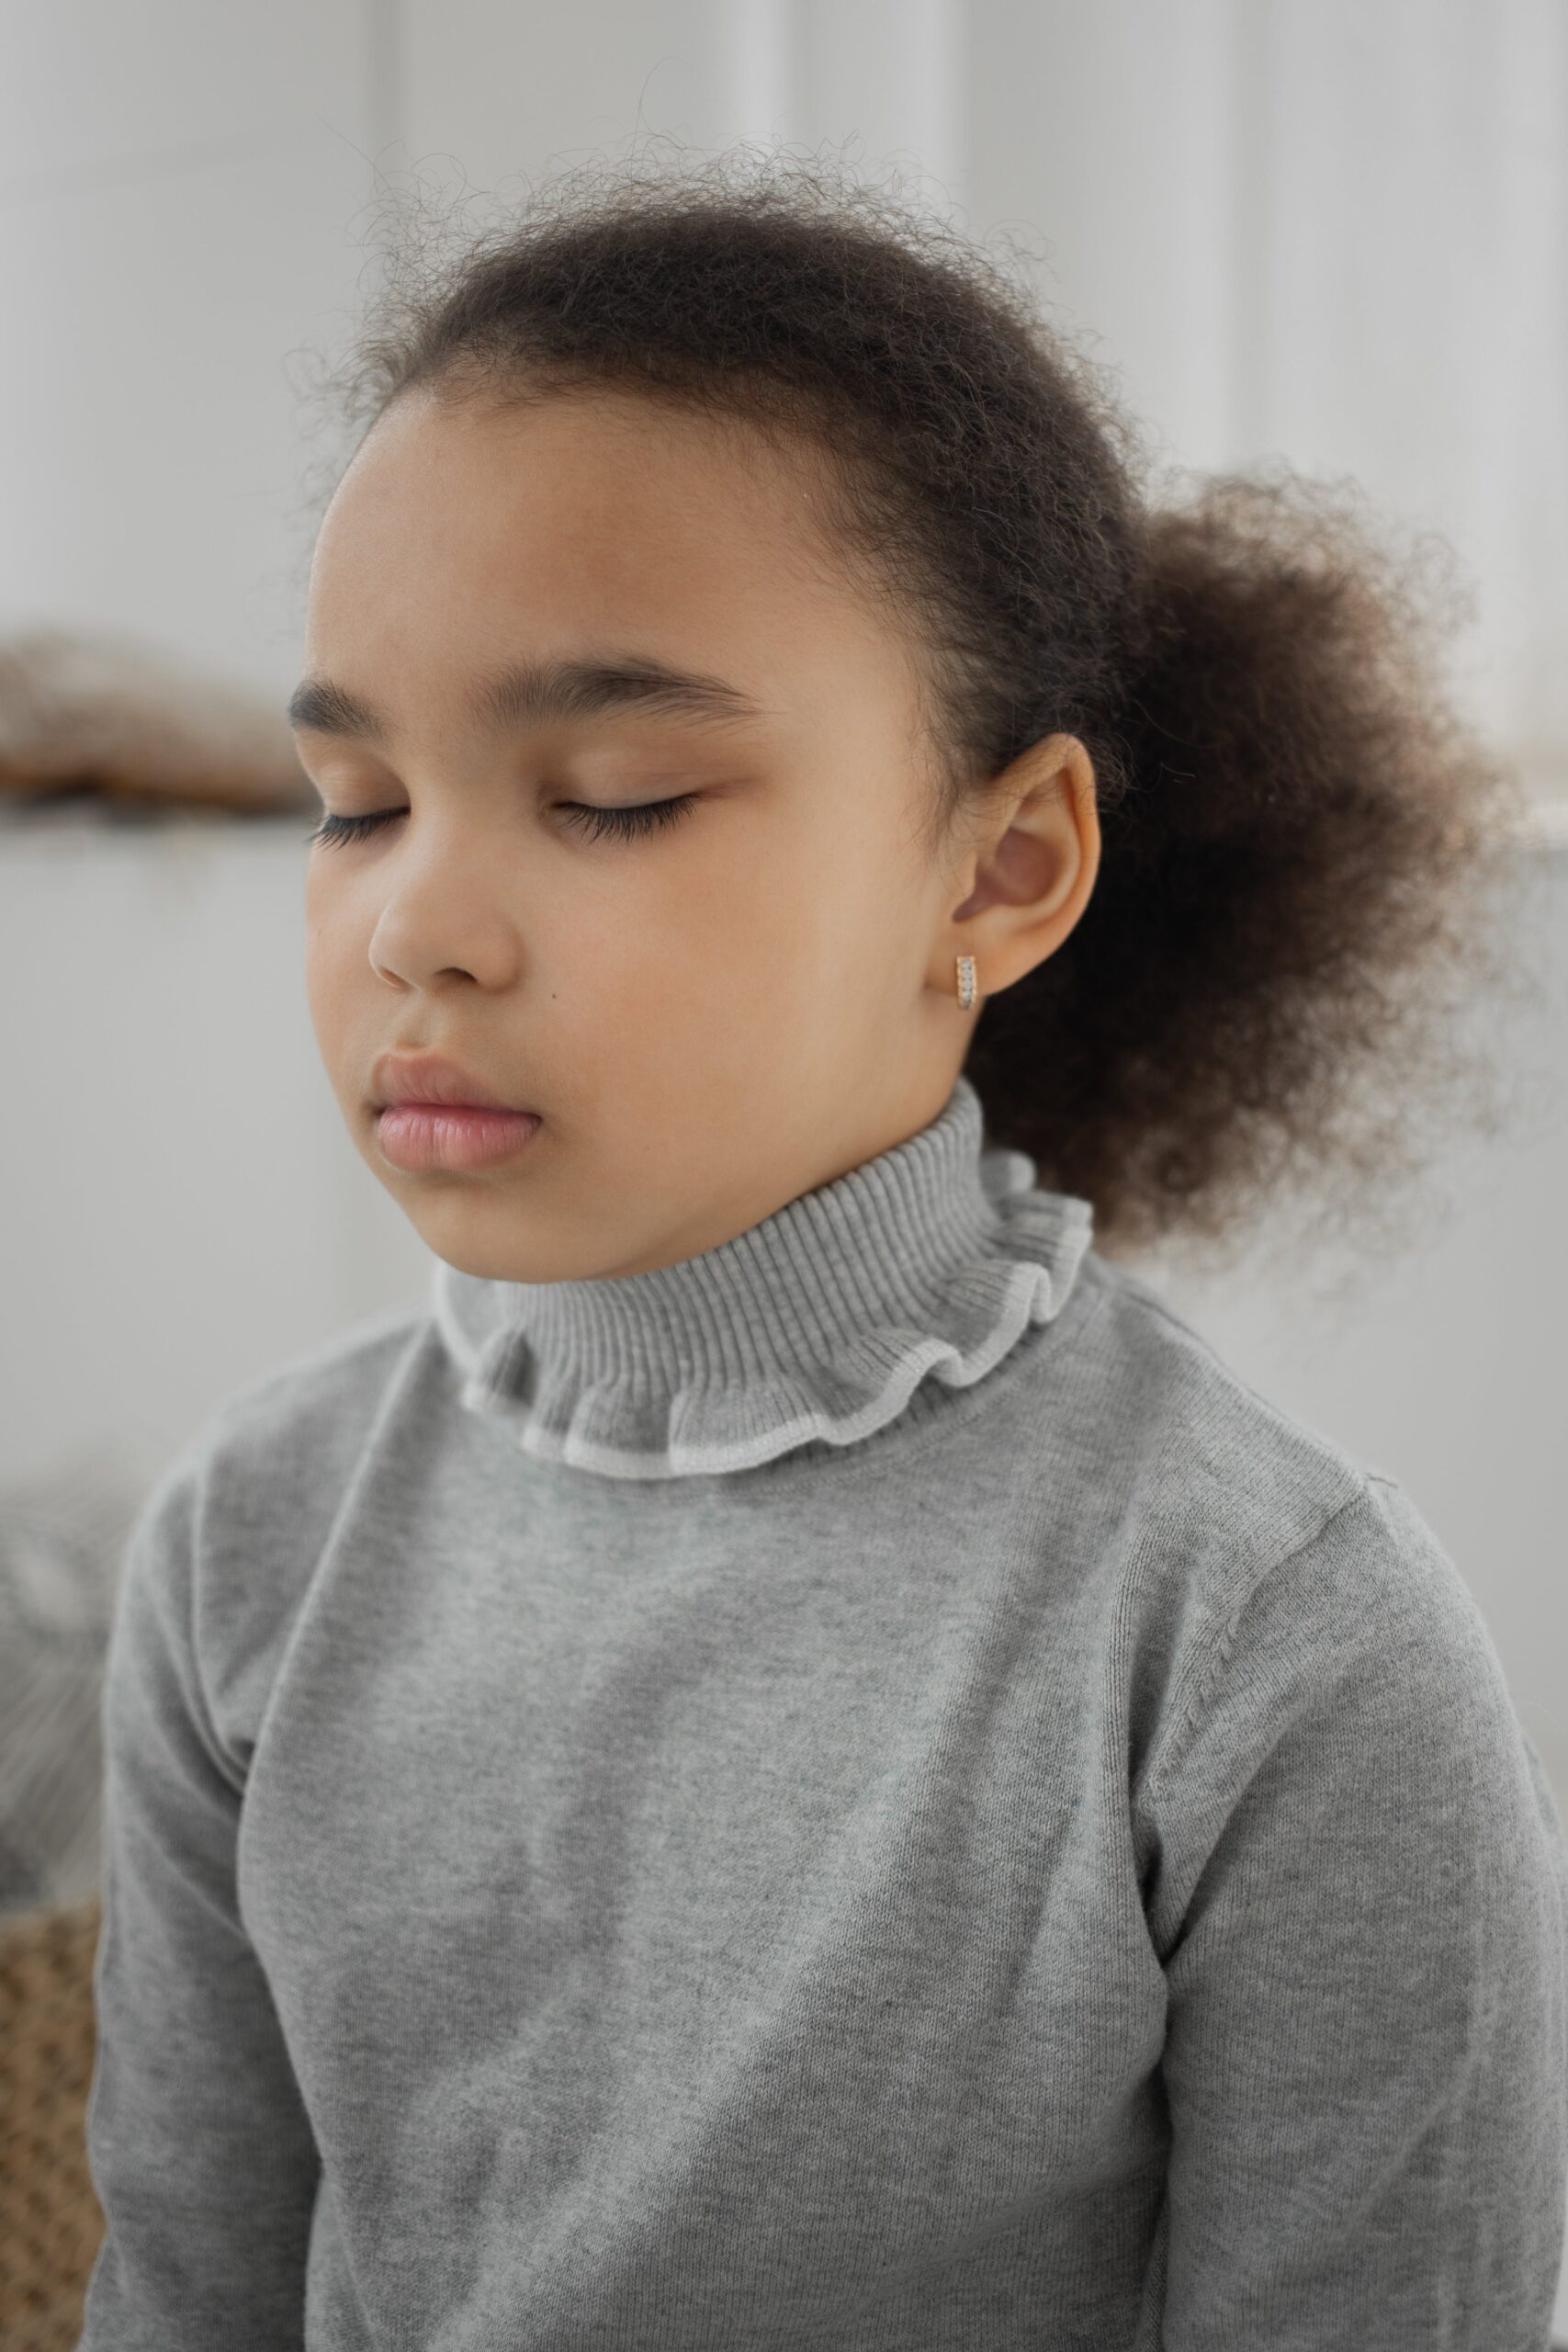 Guided Meditation for Primary School Students